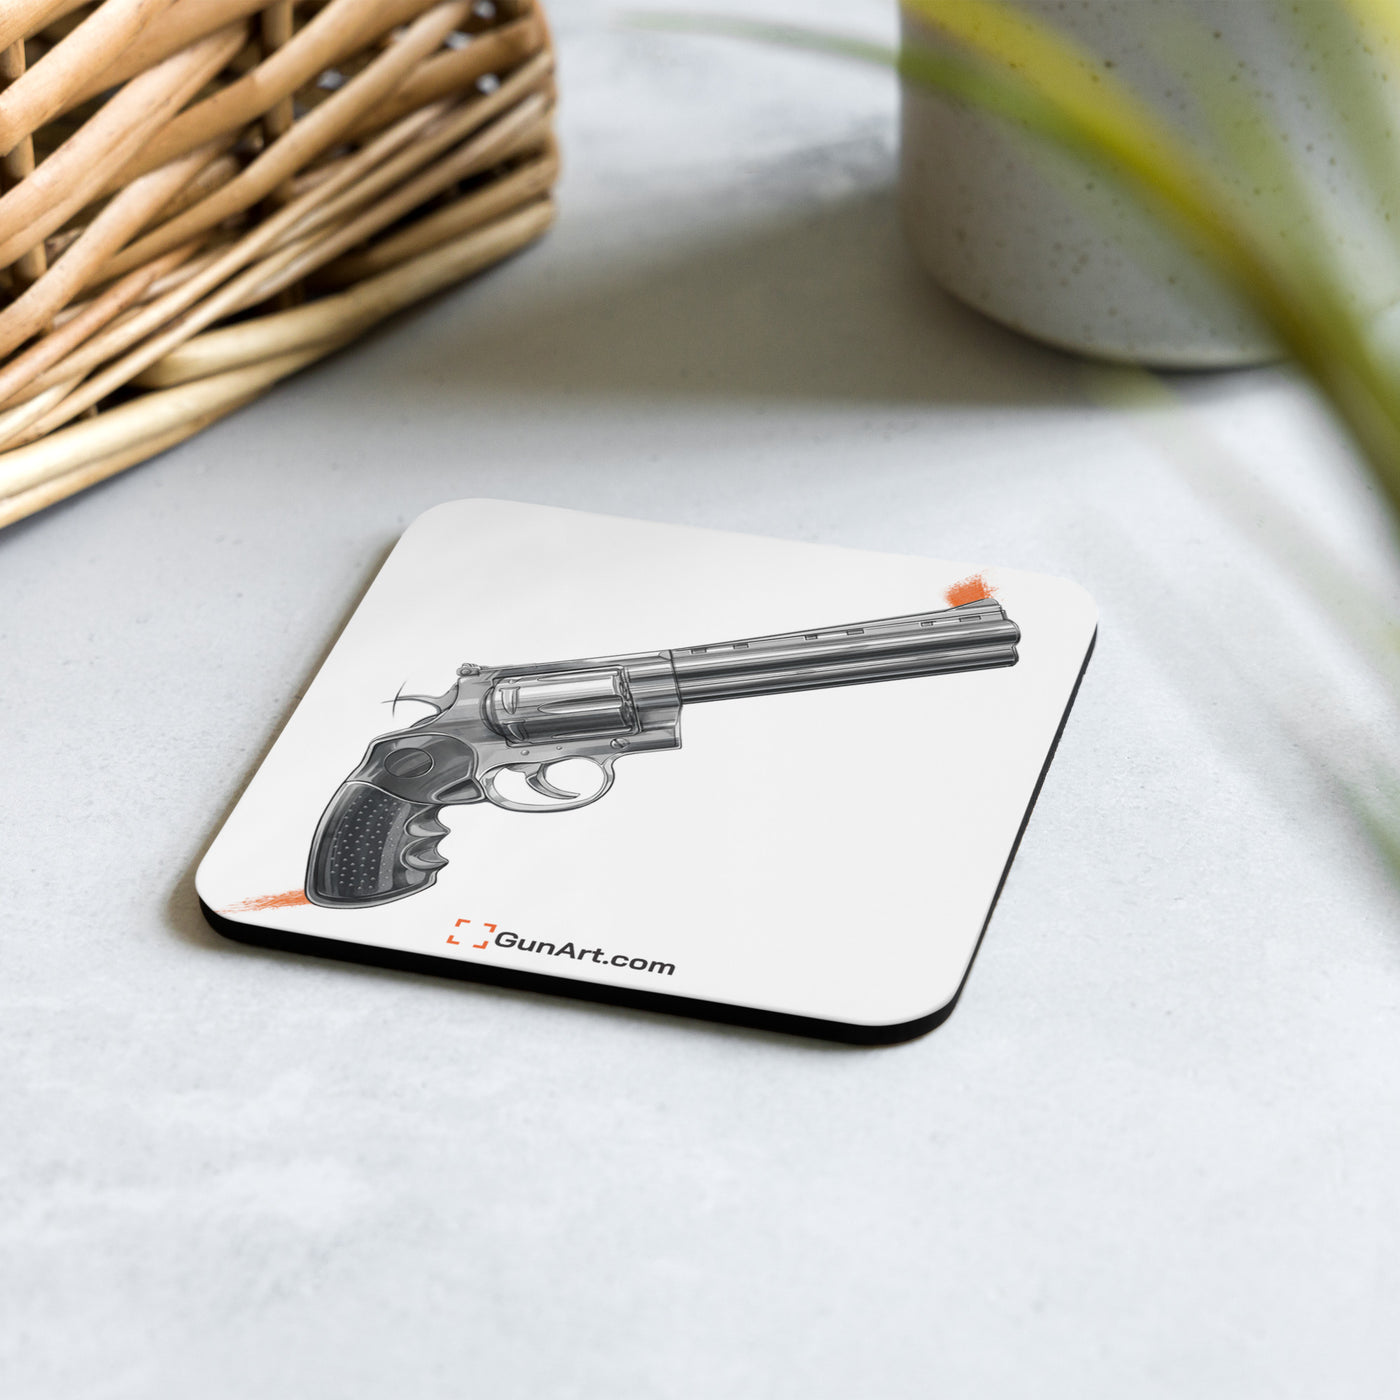 Stainless .44 Mag Revolver Cork-back Coaster - Just The Piece - White Background